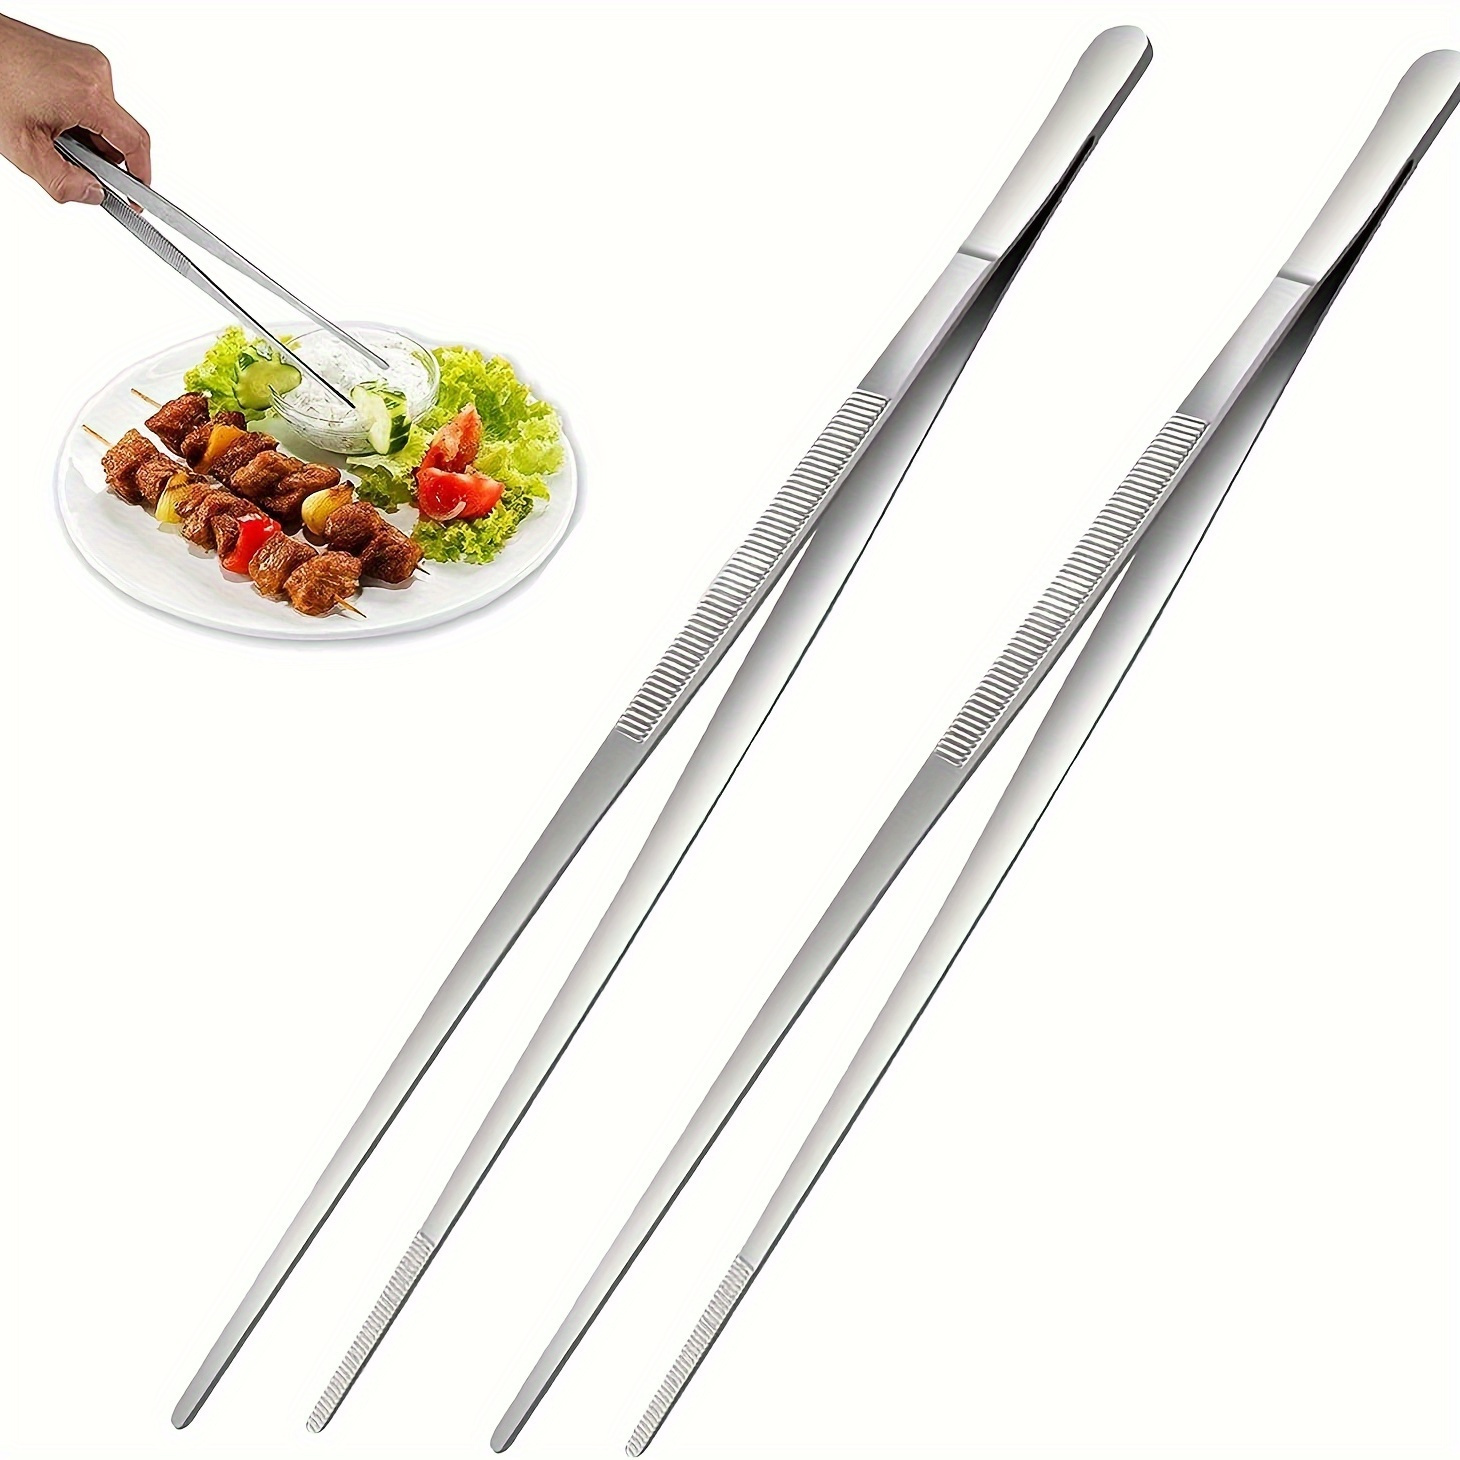 

2pcs, Barbecue Accessories Food Tongs, Food Clip, Stainless Steel Tweezers Clip, Buffet Restaurant Tools, Kitchen Gadgets, Outdoor Camping Picnic, Cookware Barbecue Tool Accessories